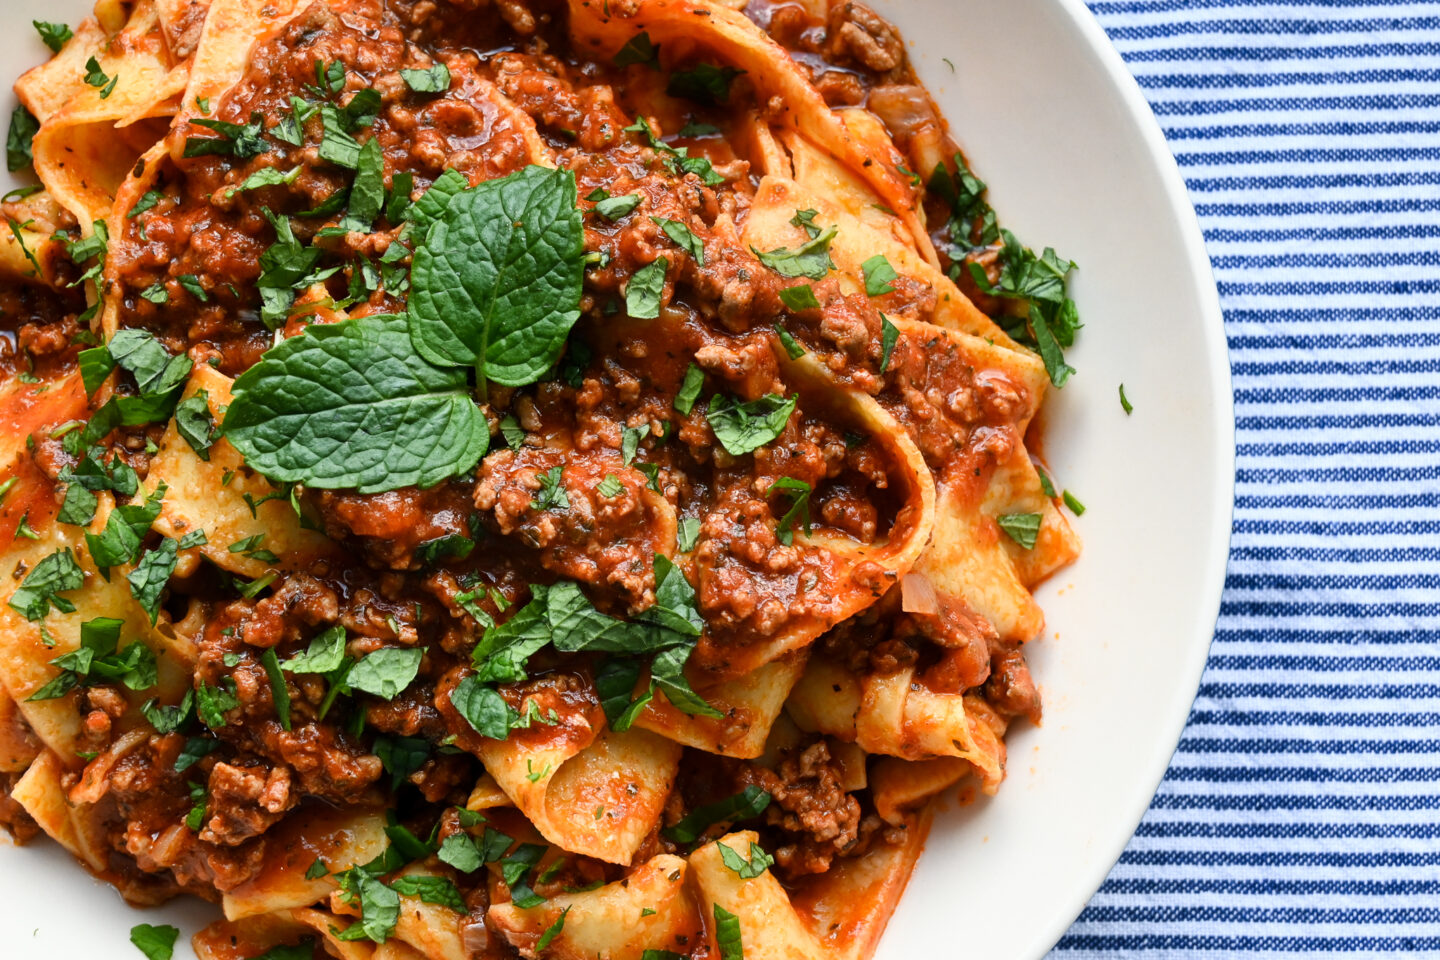 Pappardelle Pasta With Lamb Ragù garnished with mint leaves